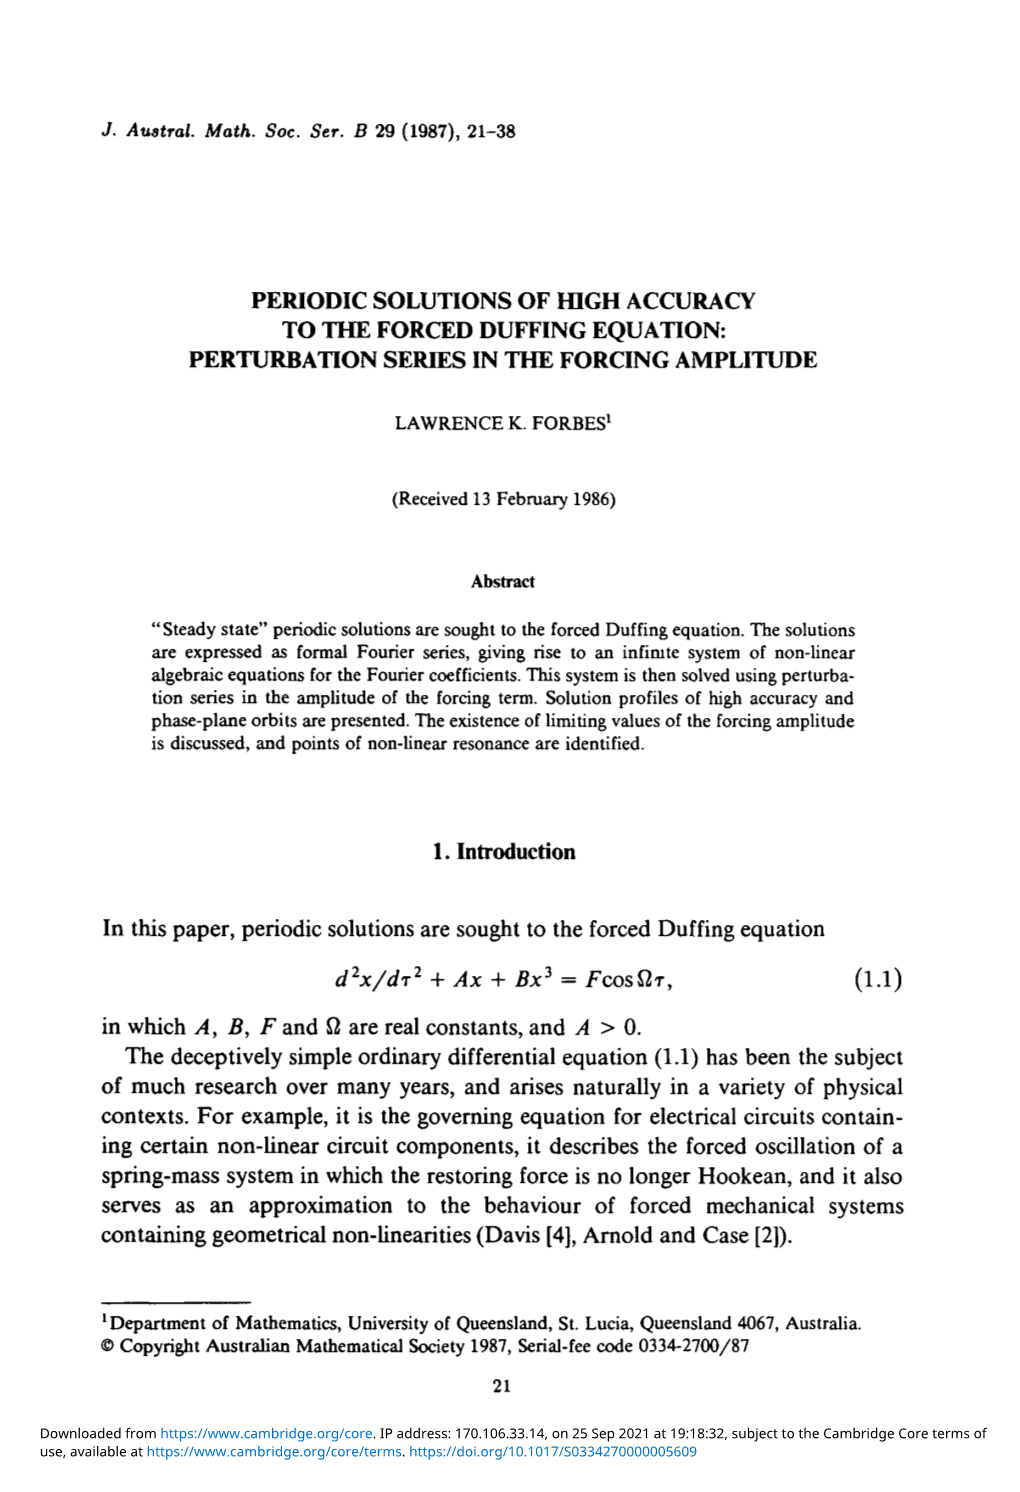 Periodic Solutions of High Accuracy to the Forced Duffing Equation: Perturbation Series in the Forcing Amplitude